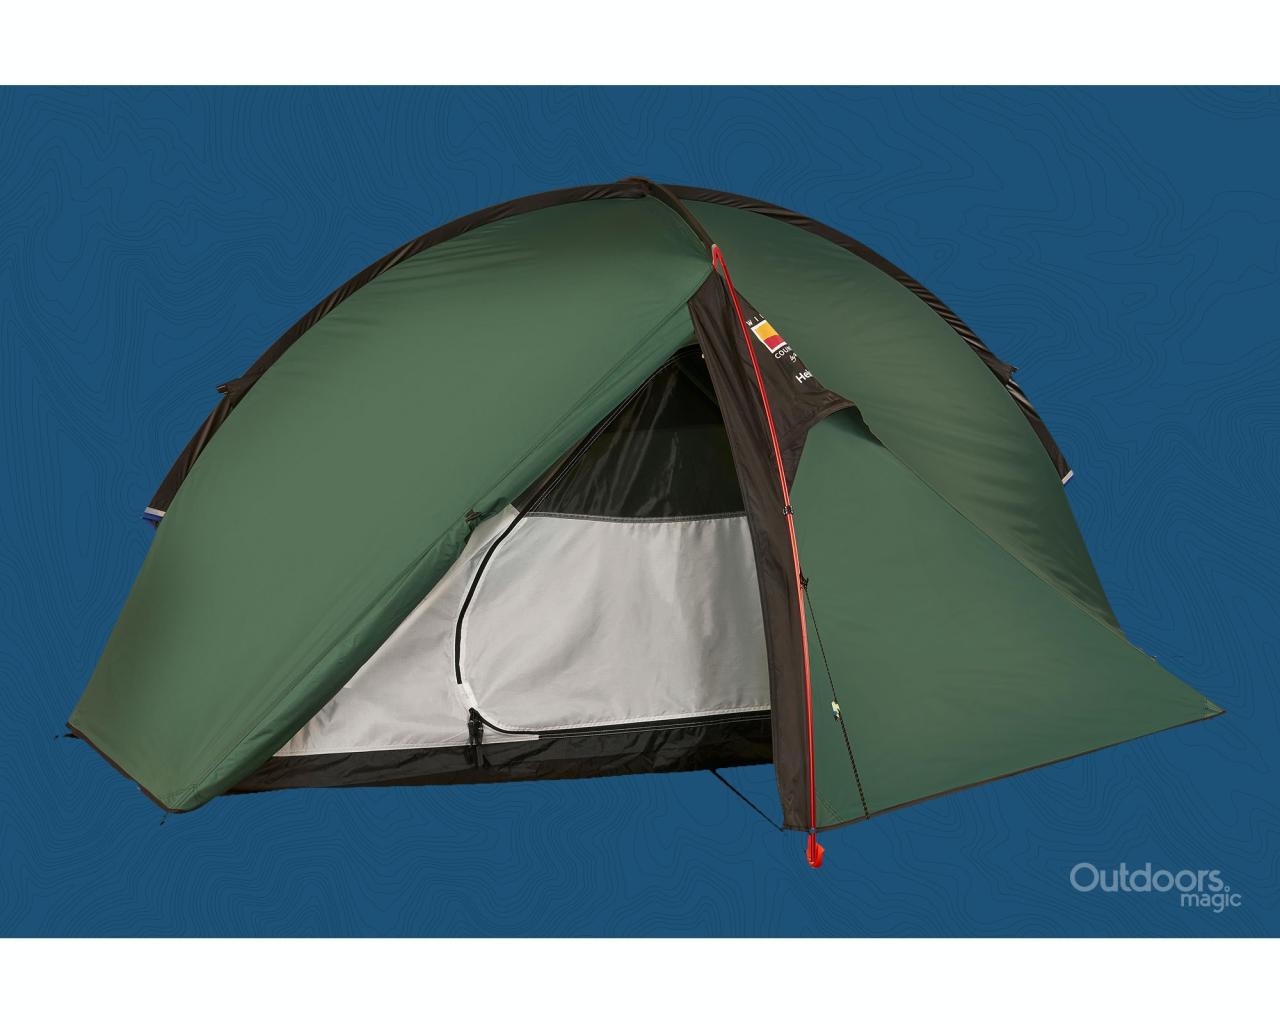 Best One Person Tents For Backpacking 2023 - Outdo...